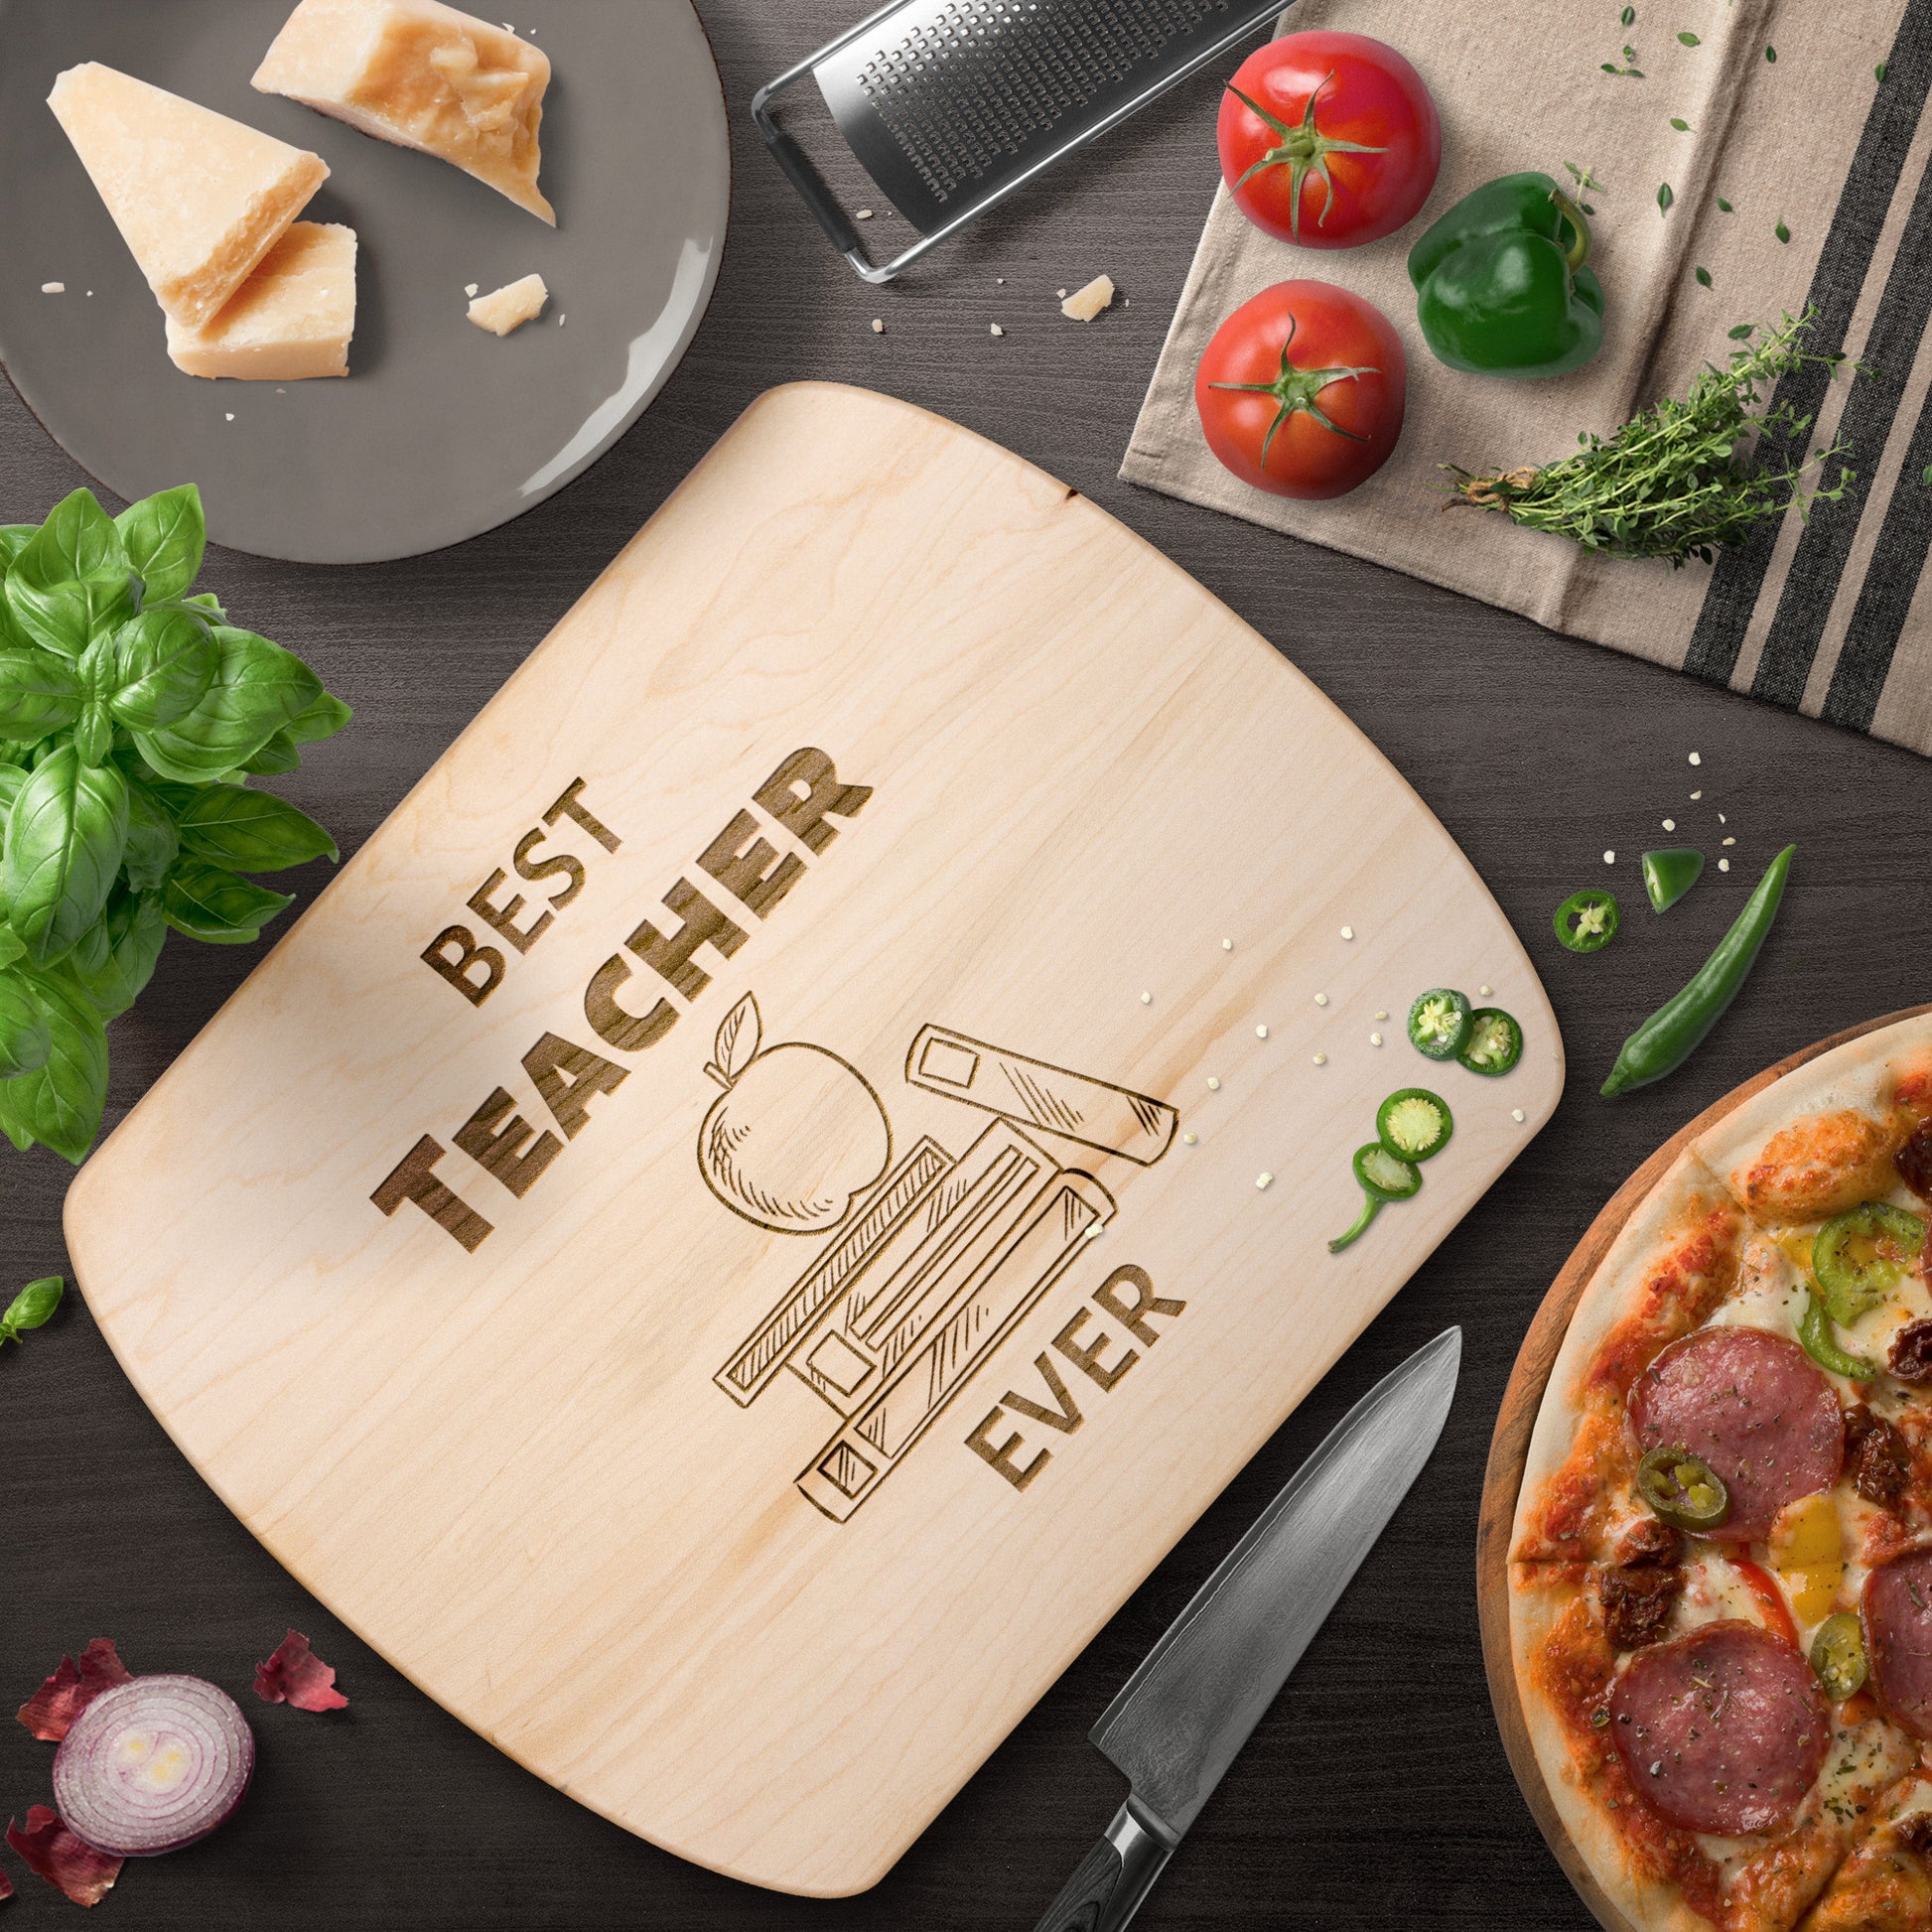 "Best Teacher Ever" Hardwood Cutting Board - Weave Got Gifts - Unique Gifts You Won’t Find Anywhere Else!